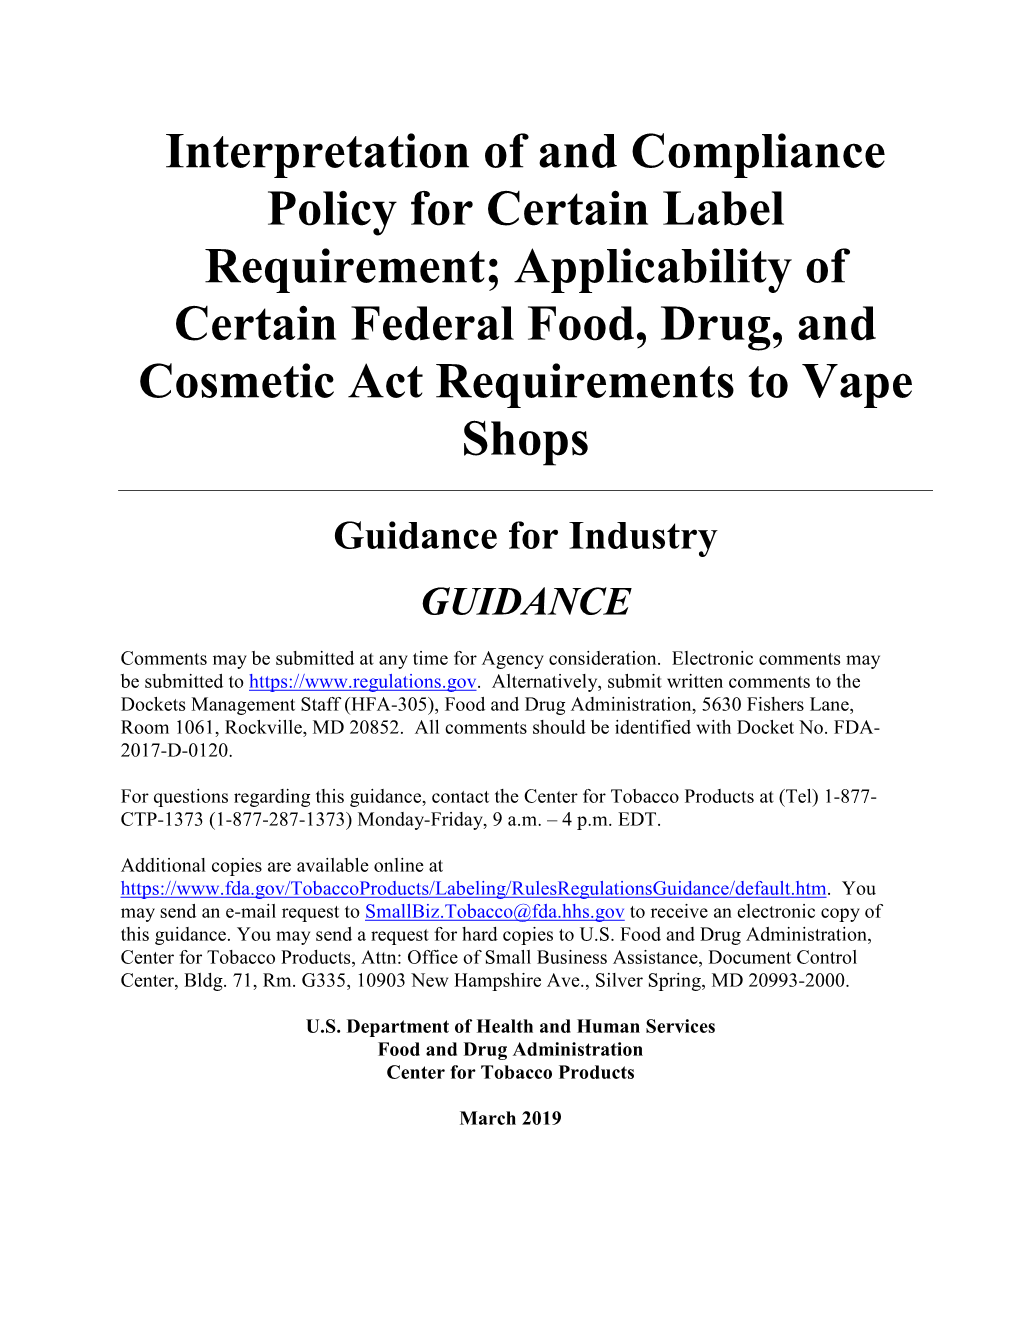 Download the Final Guidance Document